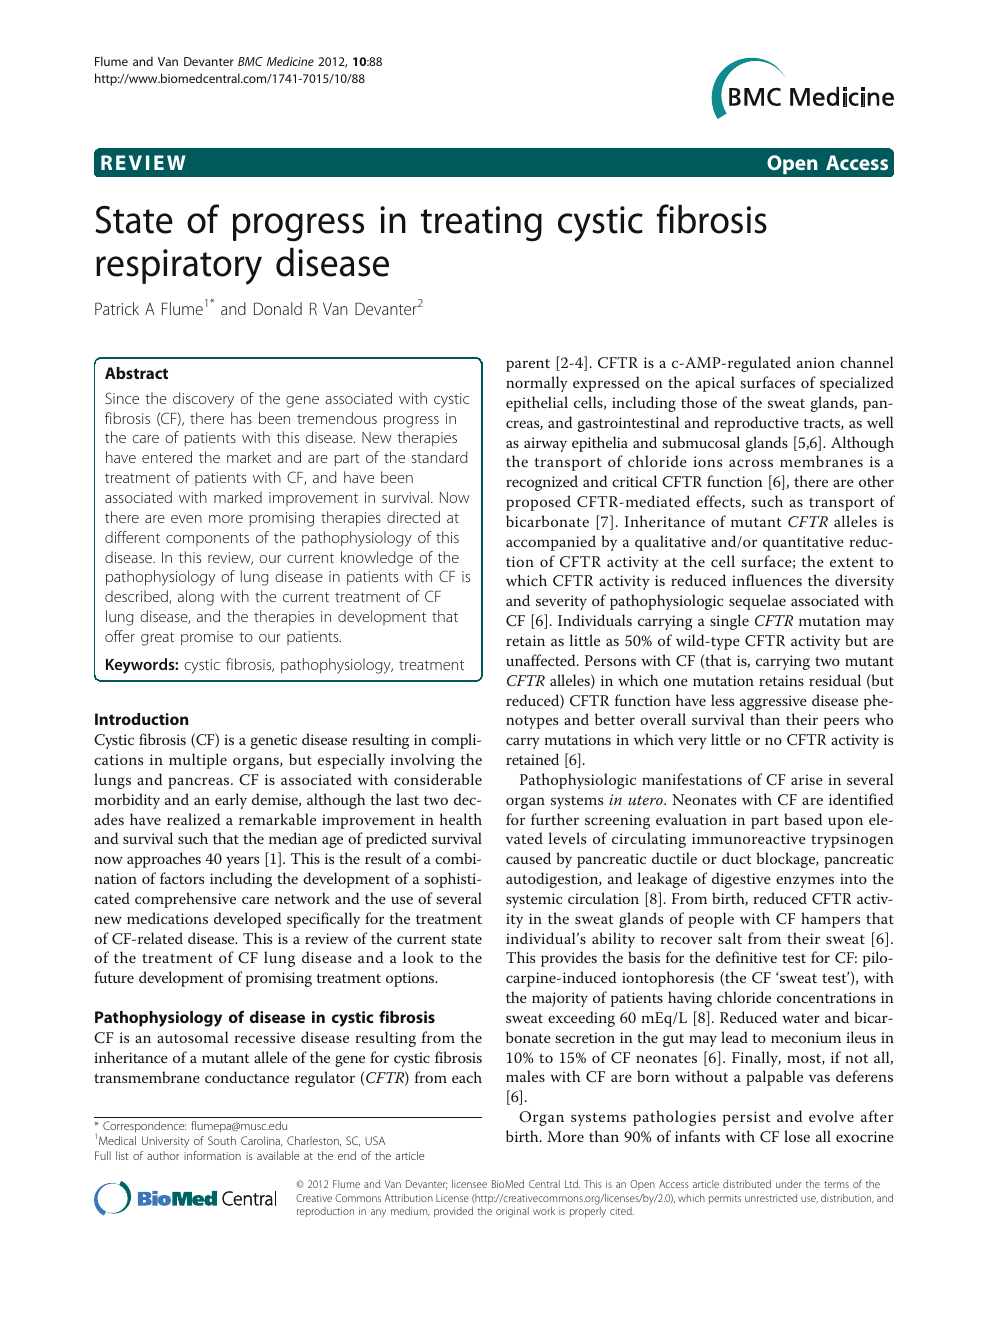 cystic fibrosis research paper